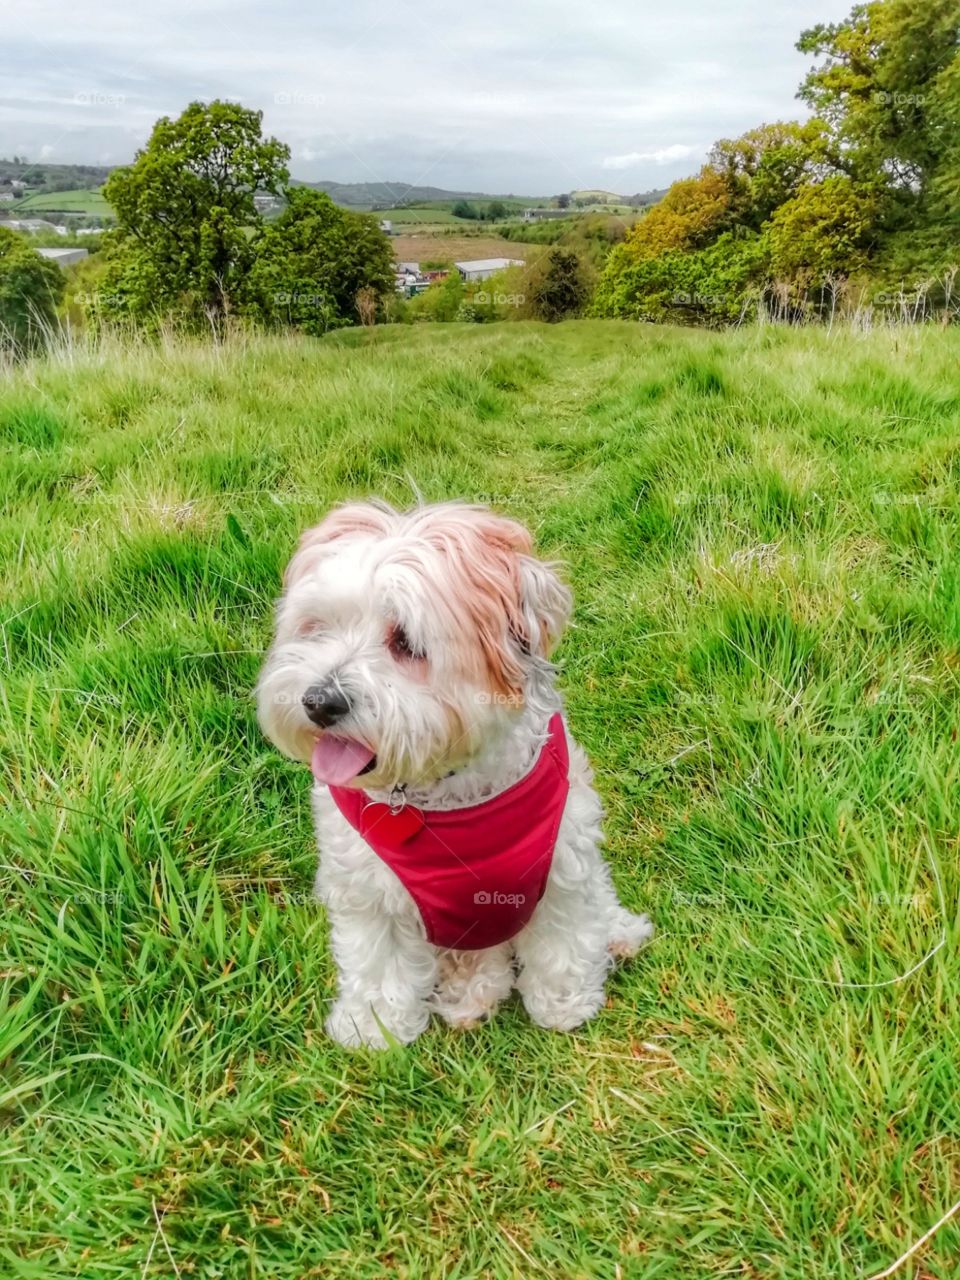 Cute Dog. outside, pet, cute, animal, dog, young, canine, grass, happy, park, nature, breed, green, outdoor, puppy, portrait, domestic, adorable, fun, purebred, summer, beautiful, mammal, playful, spring, friend, pedigree, smile, outdoors, playing,